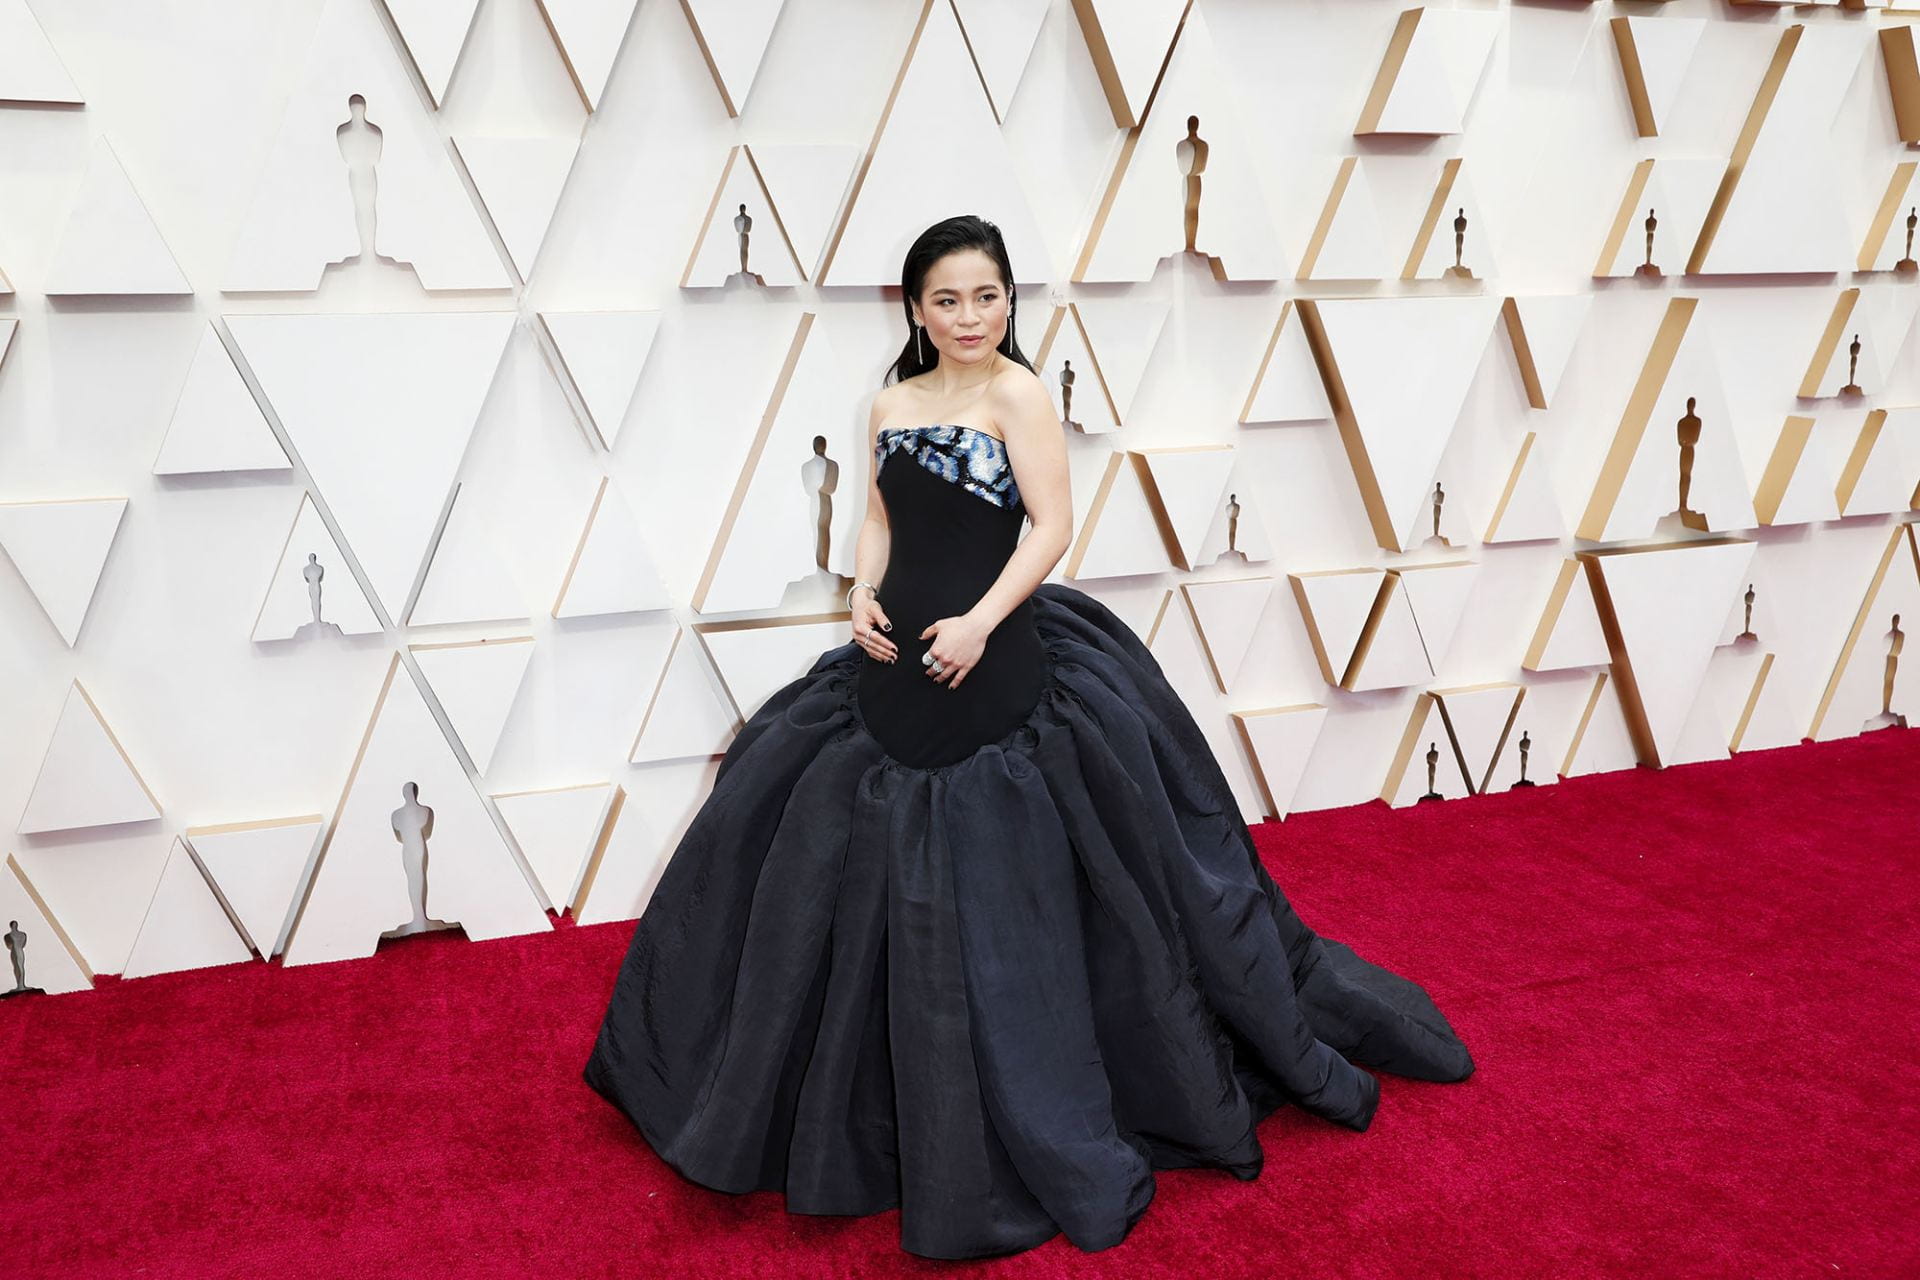 Kelly Marie Tran faced a barrage of online bullying upon portraying Rose Tico in "Star Wars: The Last Jedi," demonstrating the harmful effects of fandom. Credit: Jay L. Clendenin | Los Angeles Times (via TNS) [Original caption: Kelly Marie Tran arrives at the 92nd Academy Awards on Sunday, Feb. 9, 2020, at the Dolby Theatre at Hollywood & Highland Center in Hollywood.]